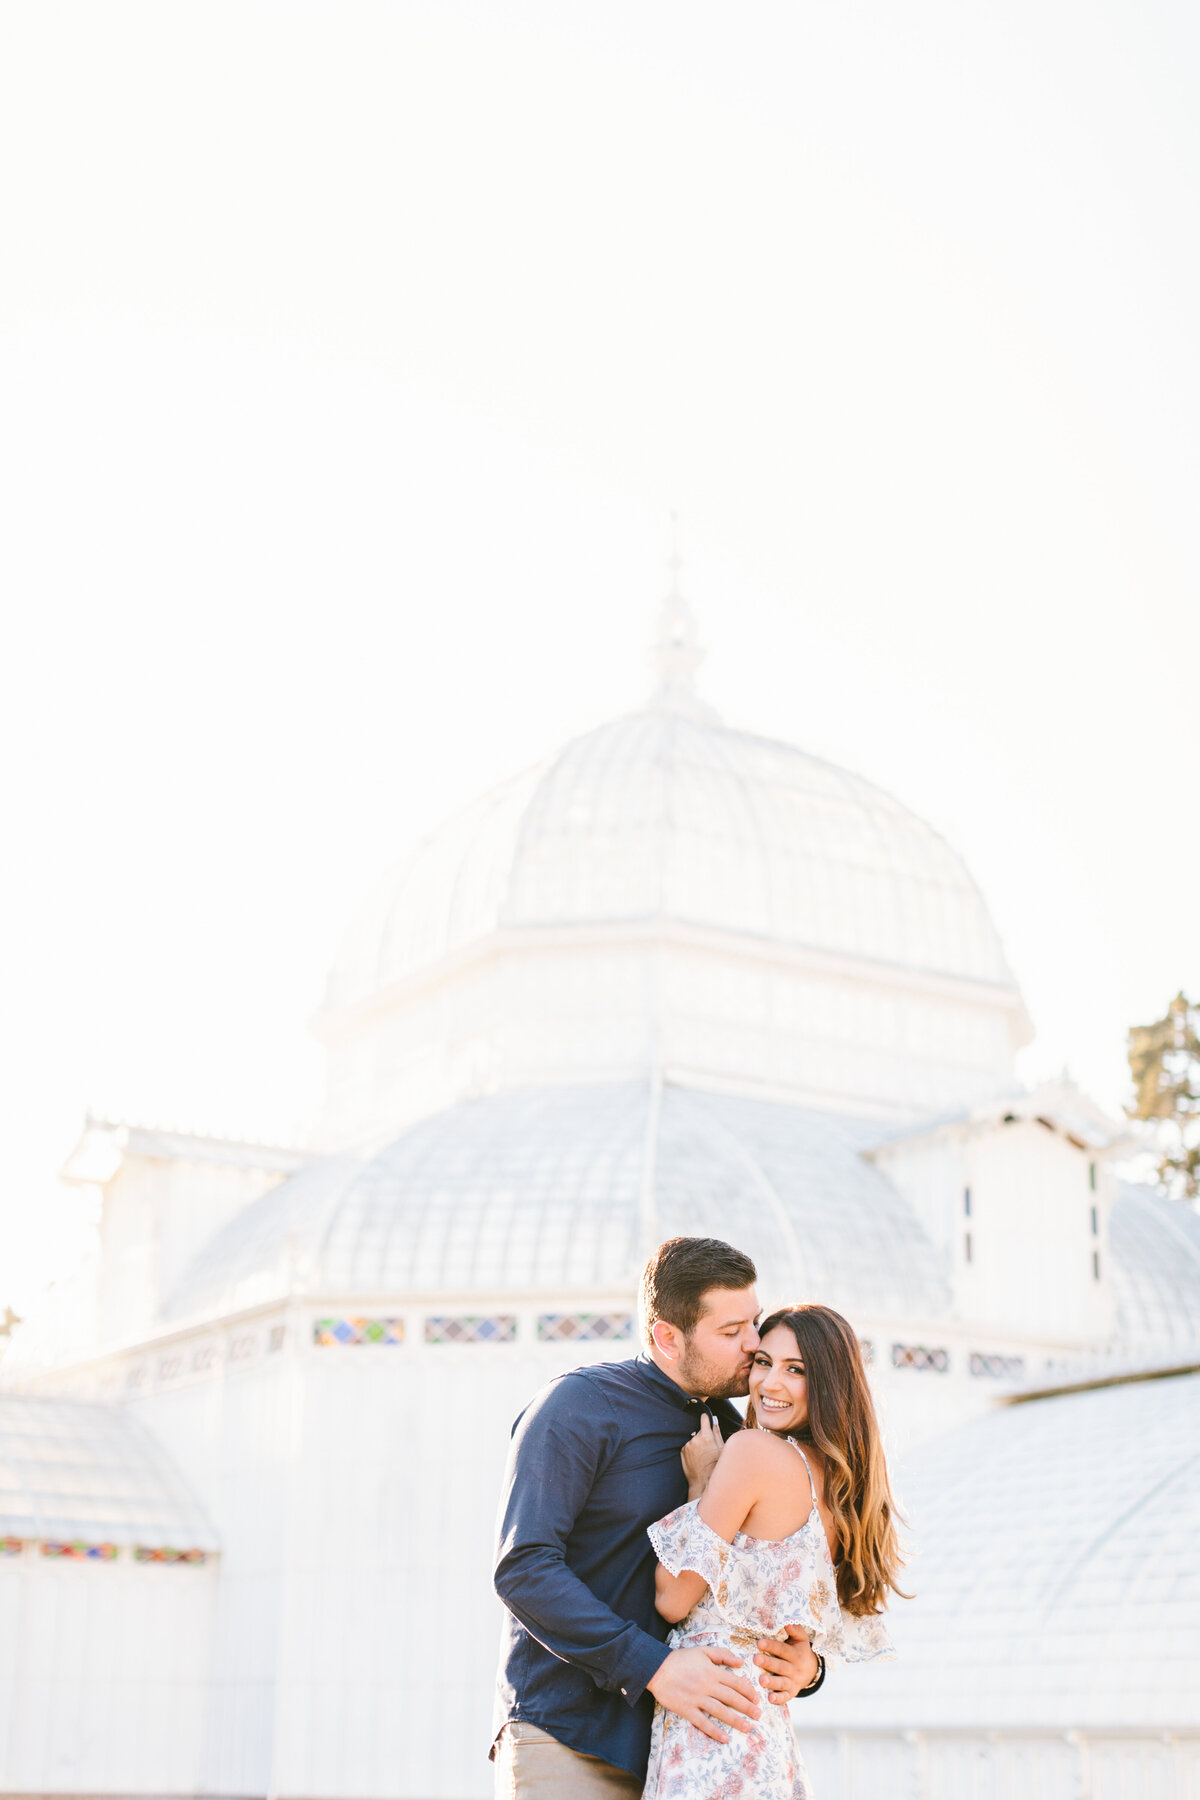 Best California and Texas Engagement Photographer-Jodee Debes Photography-157